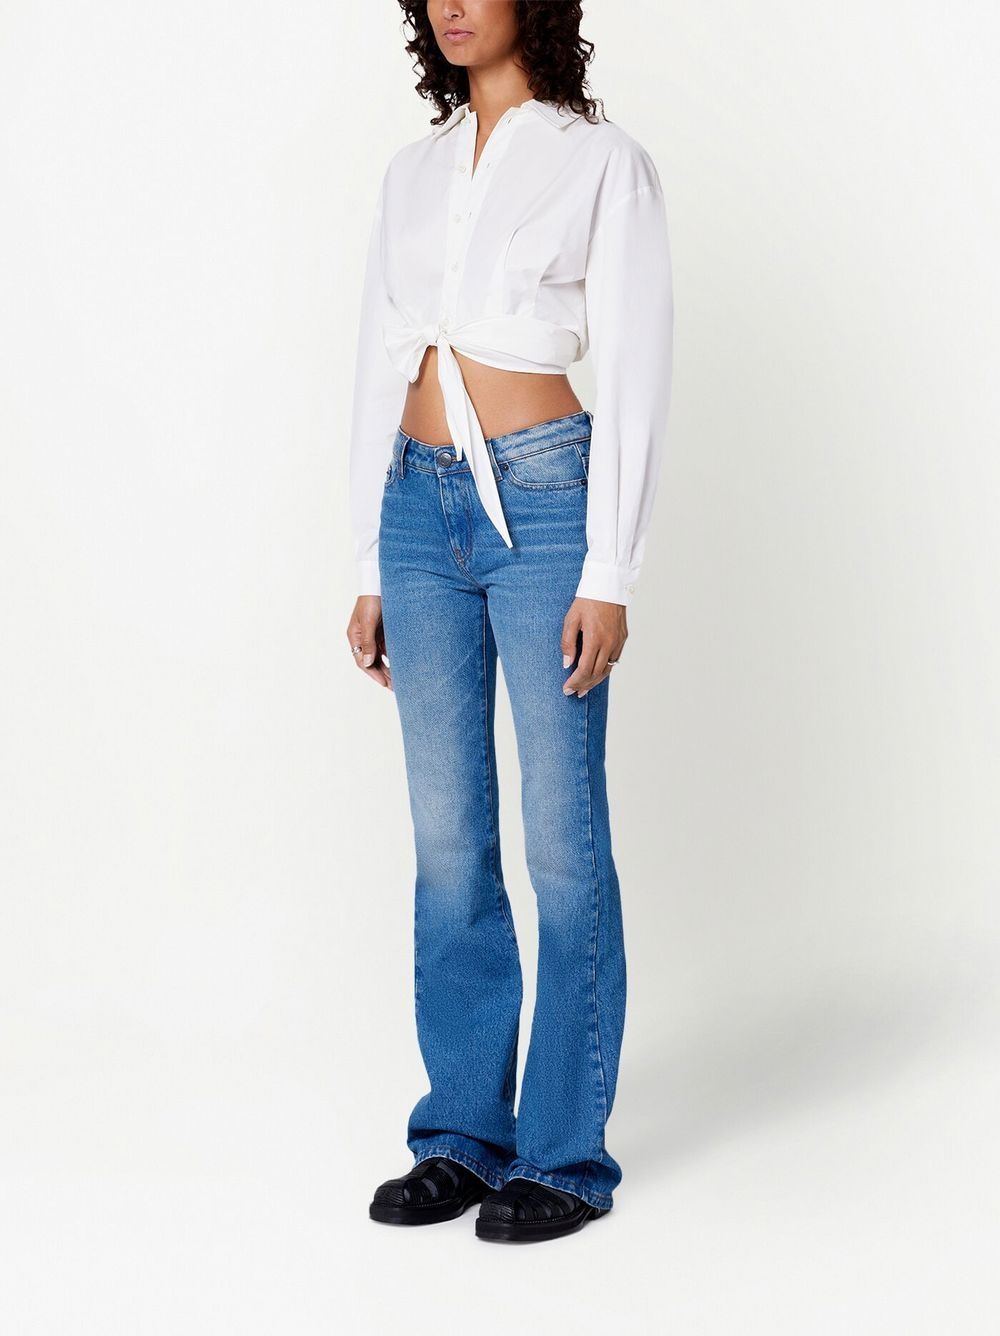 Shop Ami Alexandre Mattiussi Tied Front Cropped Shirt In White